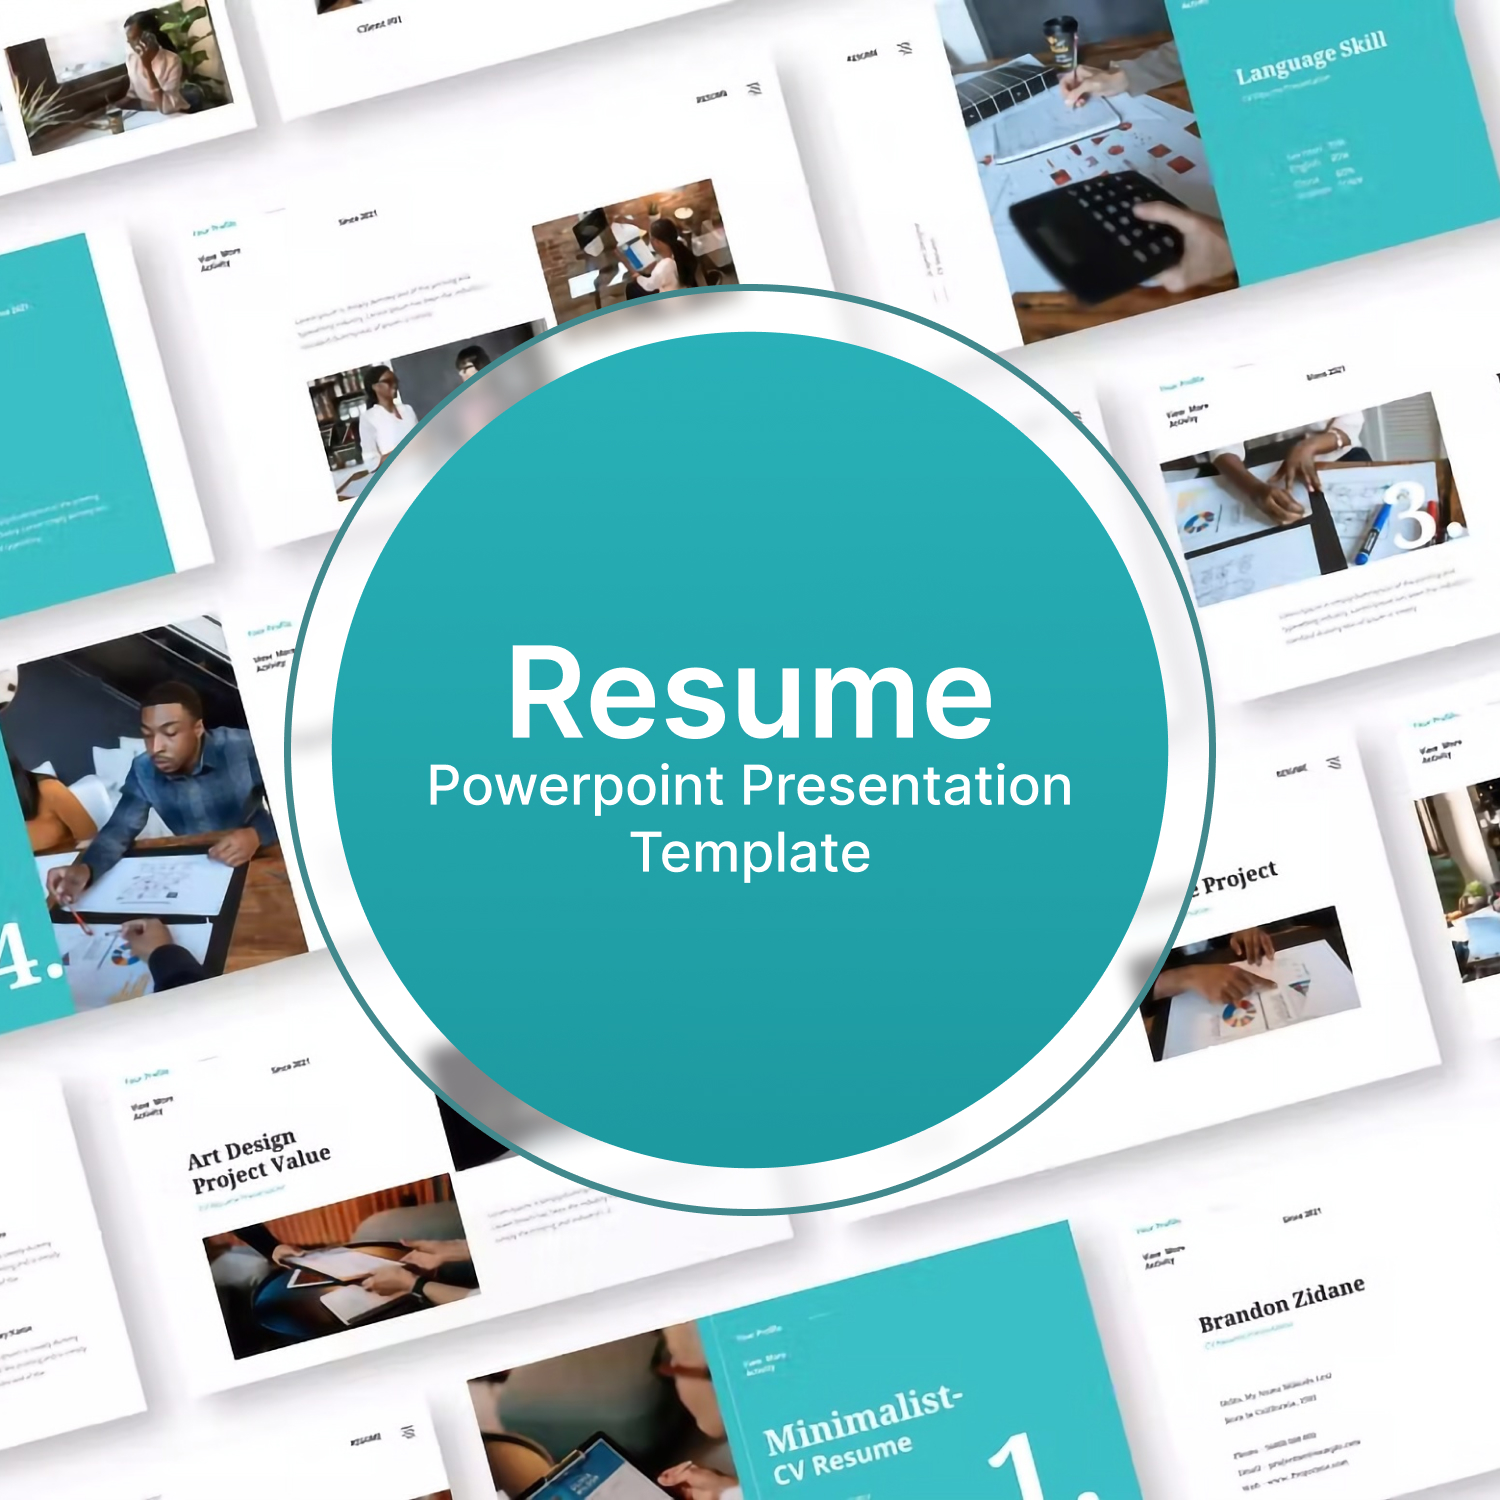 Resume powerpoint presentation template preview.